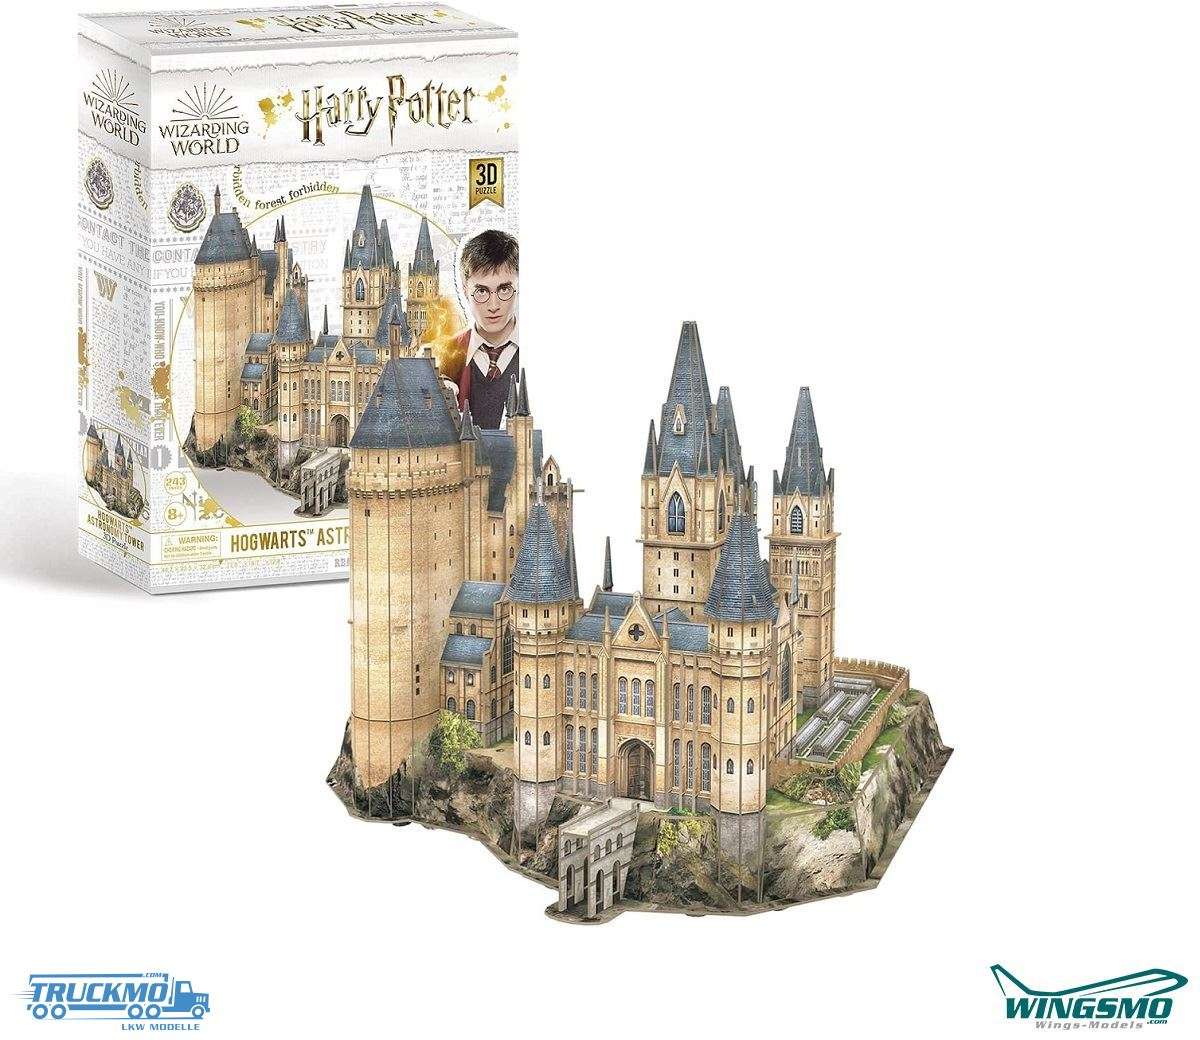 Revell 3D Puzzle Harry Potter Hogwarts Astronomy Tower 00301